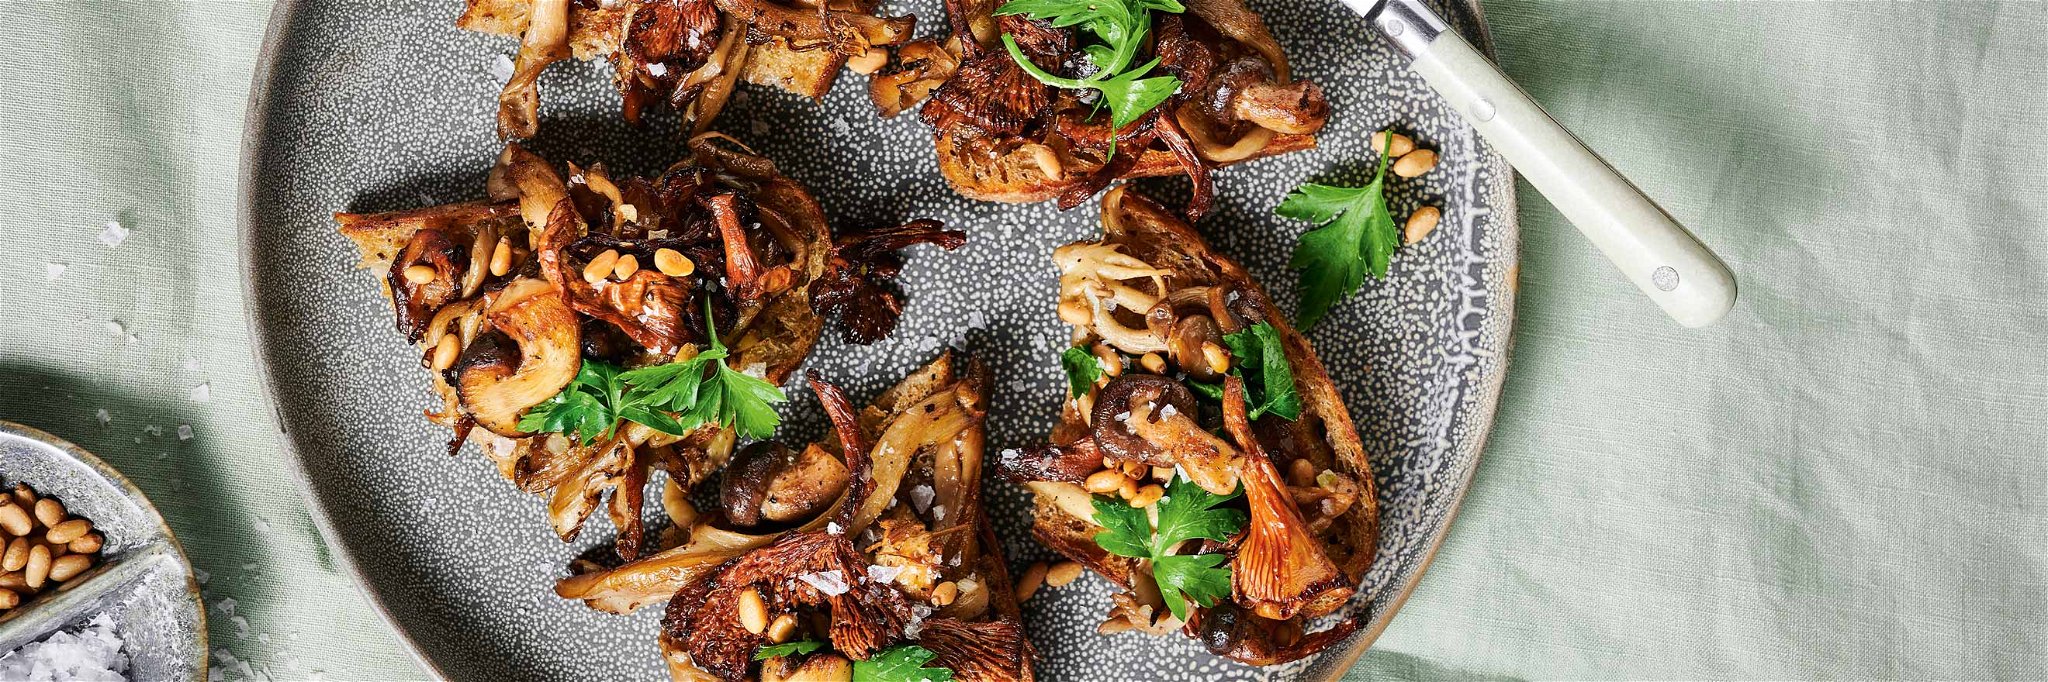 Fried Wild Mushrooms and Pine Nuts on Grilled Sourdough